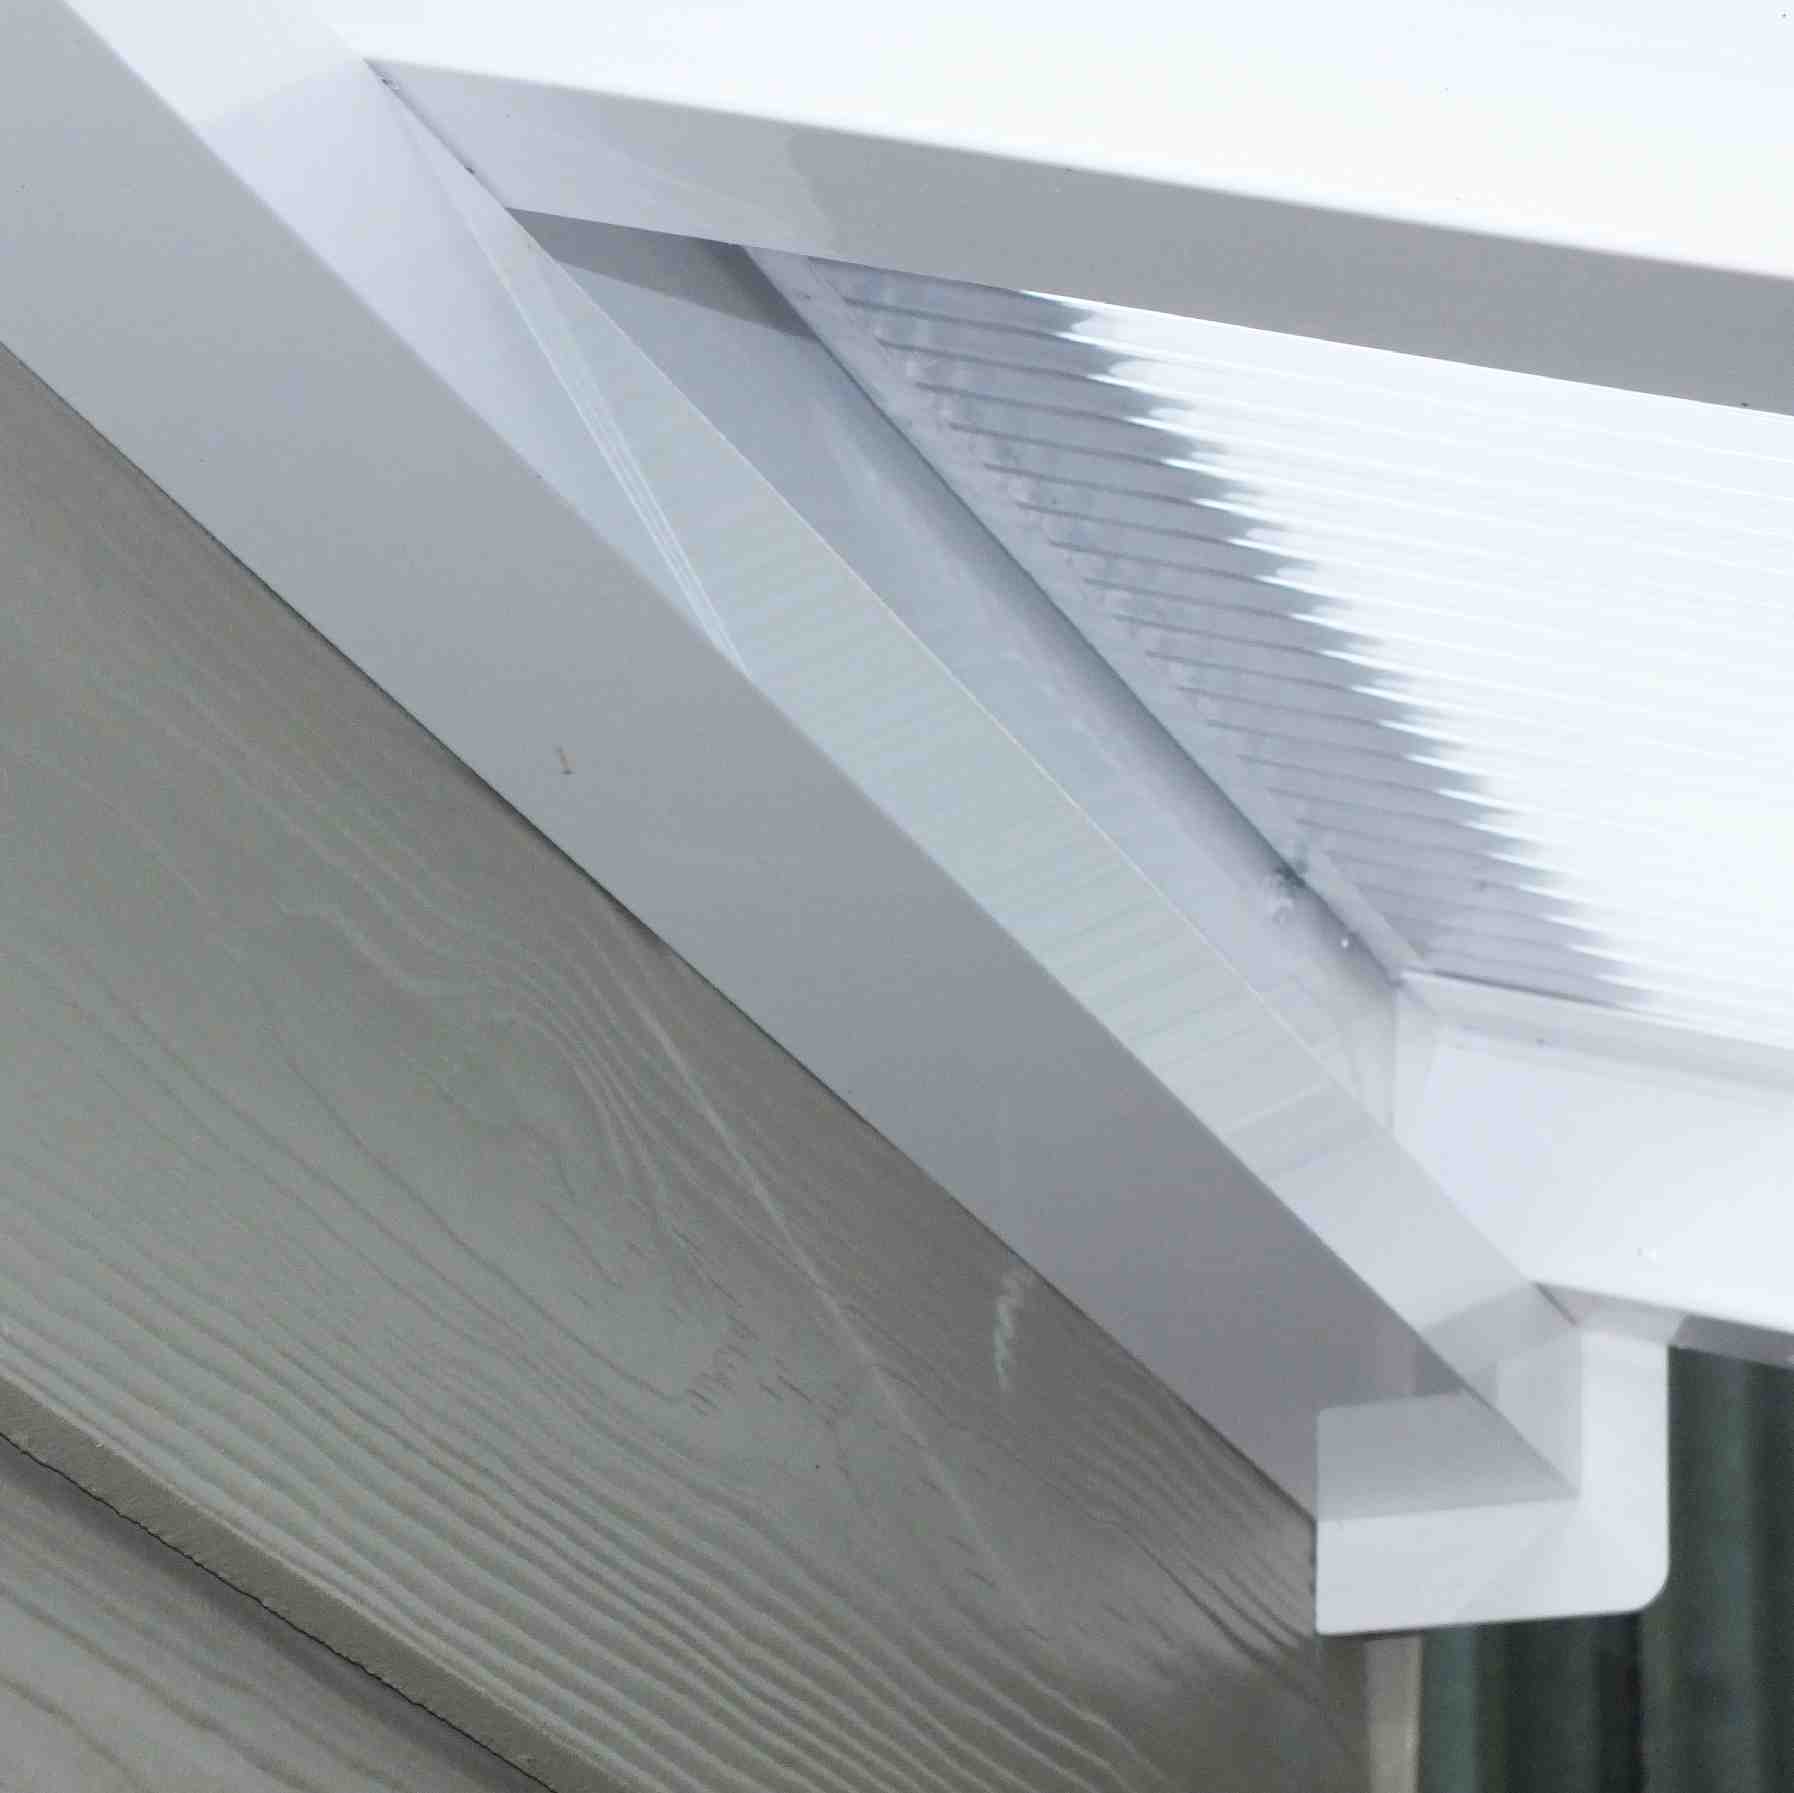 Great deals on Omega Verandah White with 16mm Polycarbonate Glazing - 3.1m (W) x 2.5m (P), (2) Supporting Posts